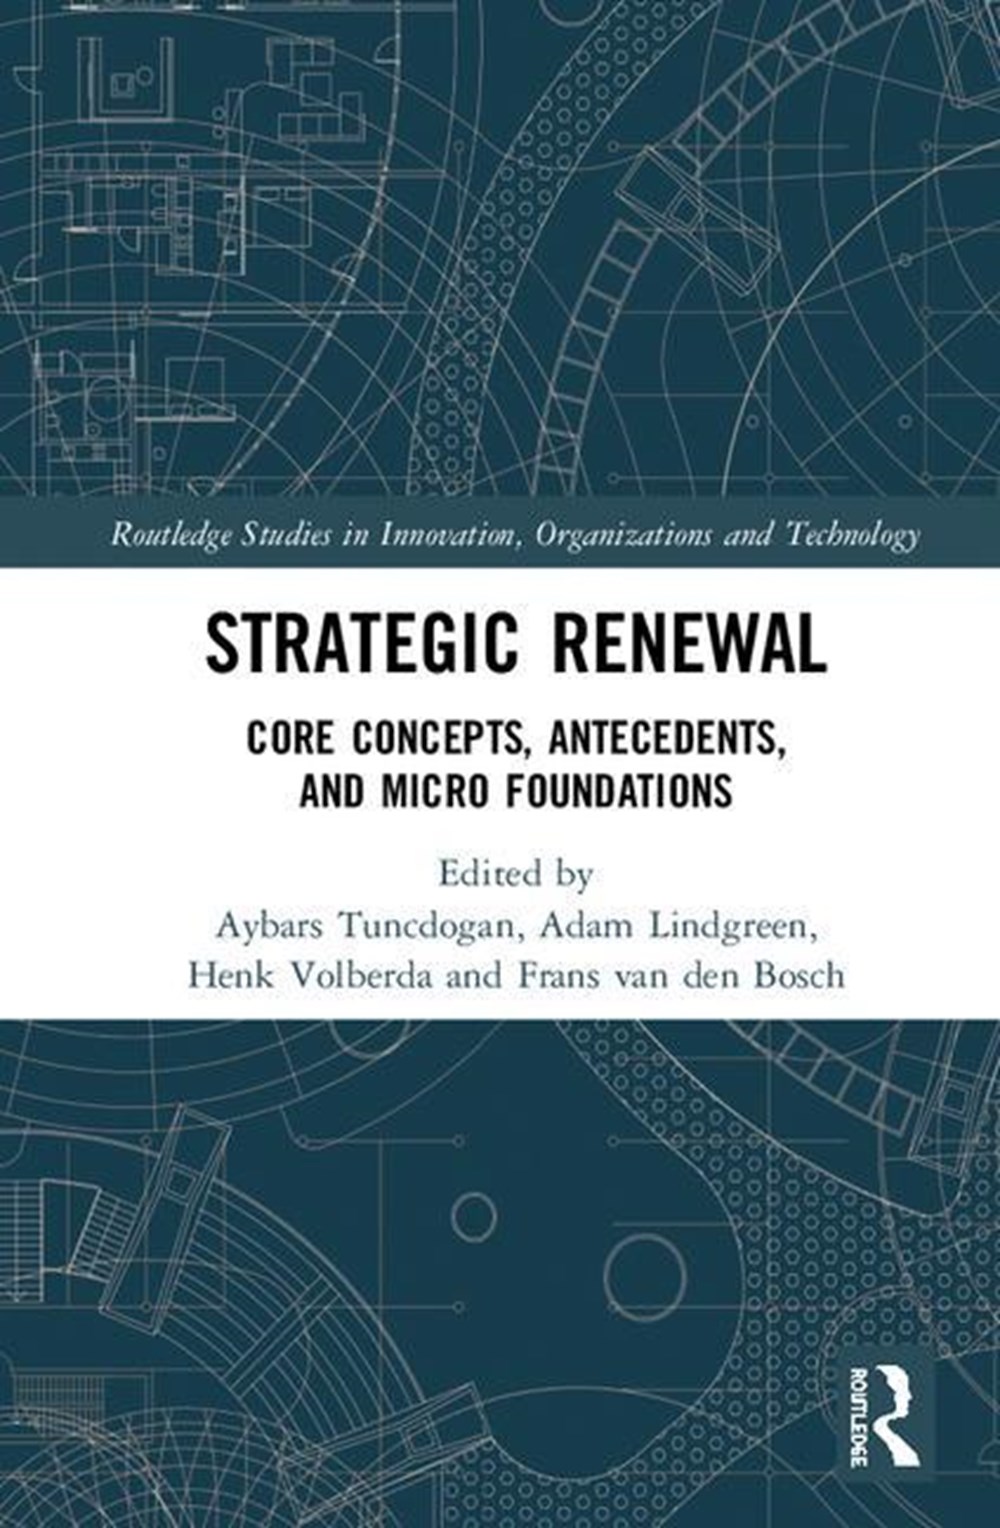 Strategic Renewal: Core Concepts, Antecedents, and Micro Foundations